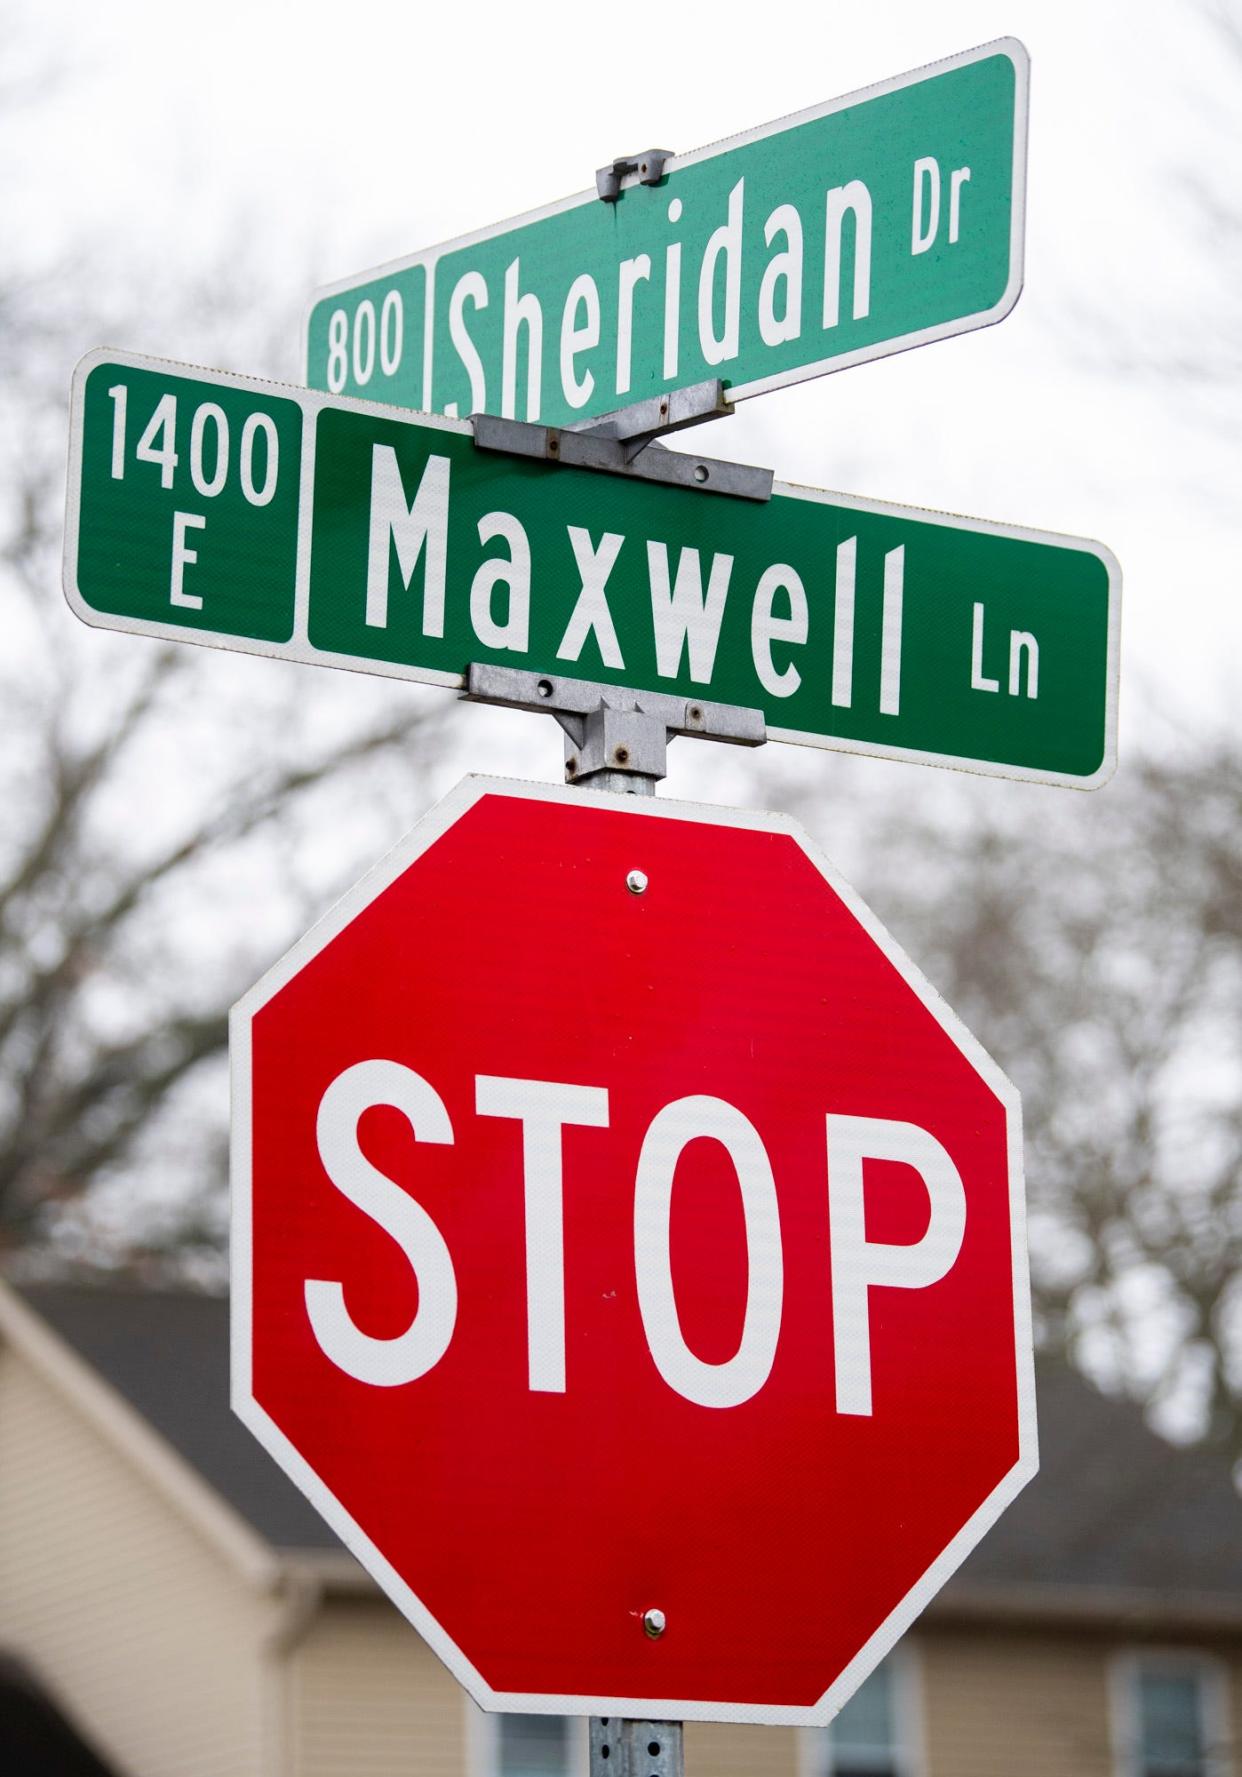 The corner of South Sheridan Road from East Maxwell Lane on Friday, Dec. 9, 2022.